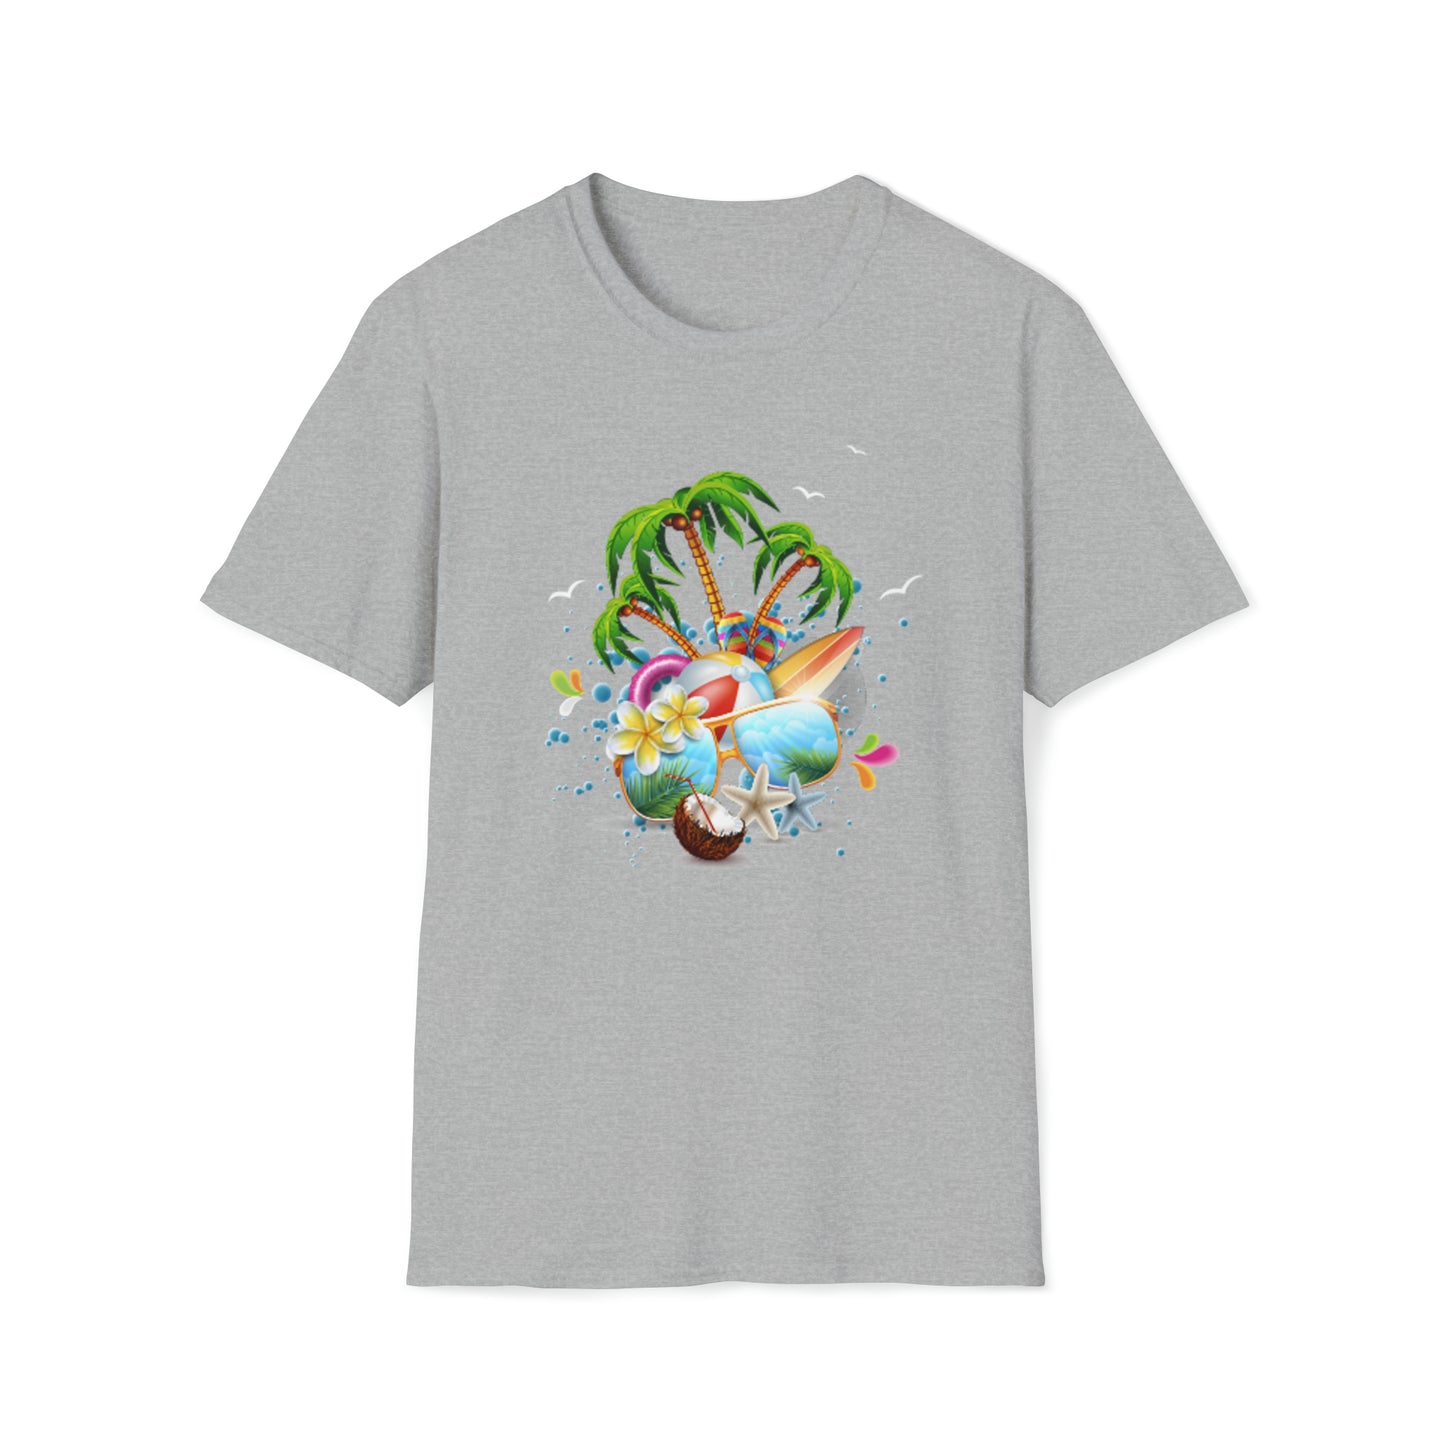 Unisex Softstyle T-Shirt The Child In Me 03 Beach